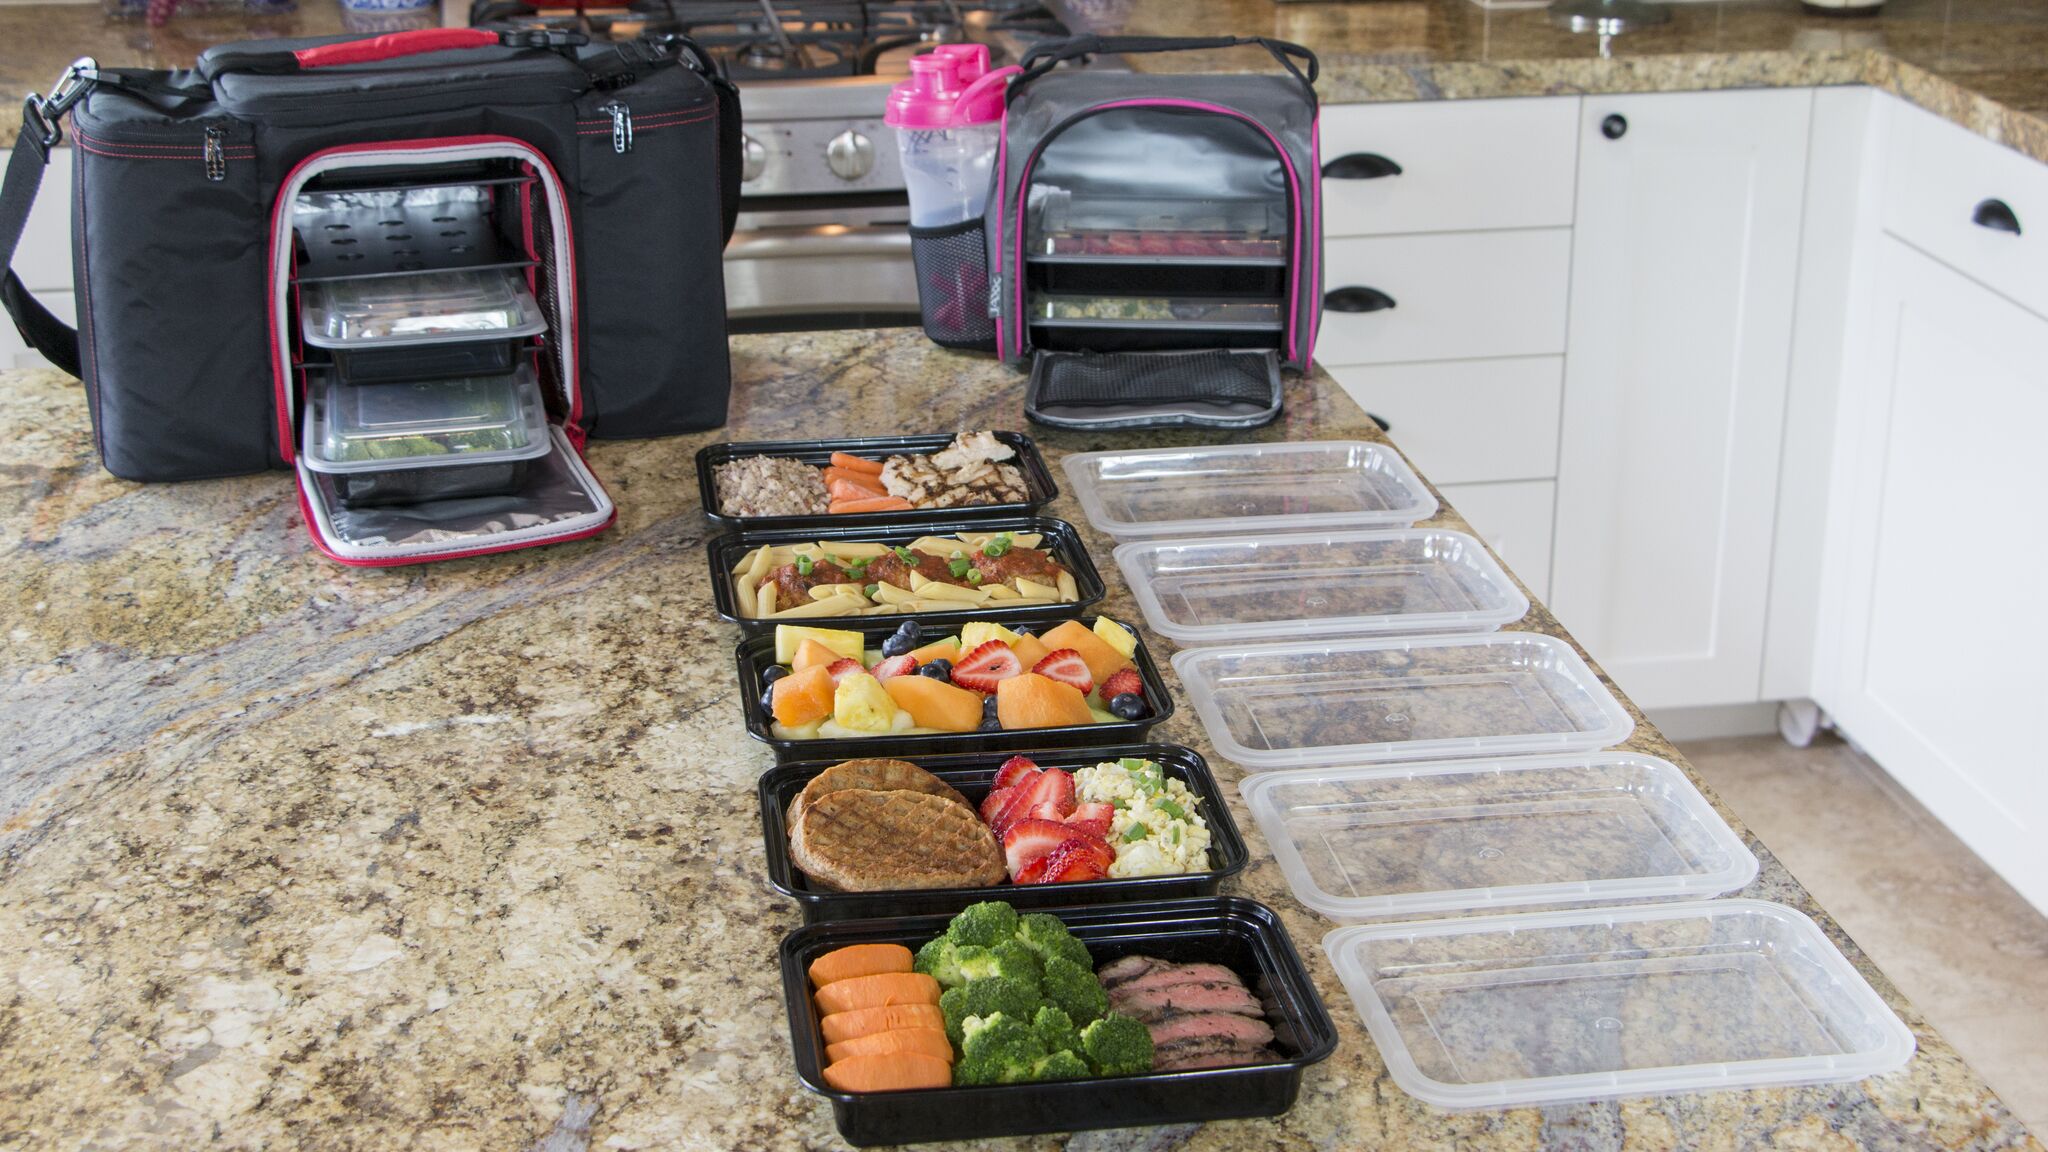 INEVIFIT | Meal Prep Containers 28 oz.